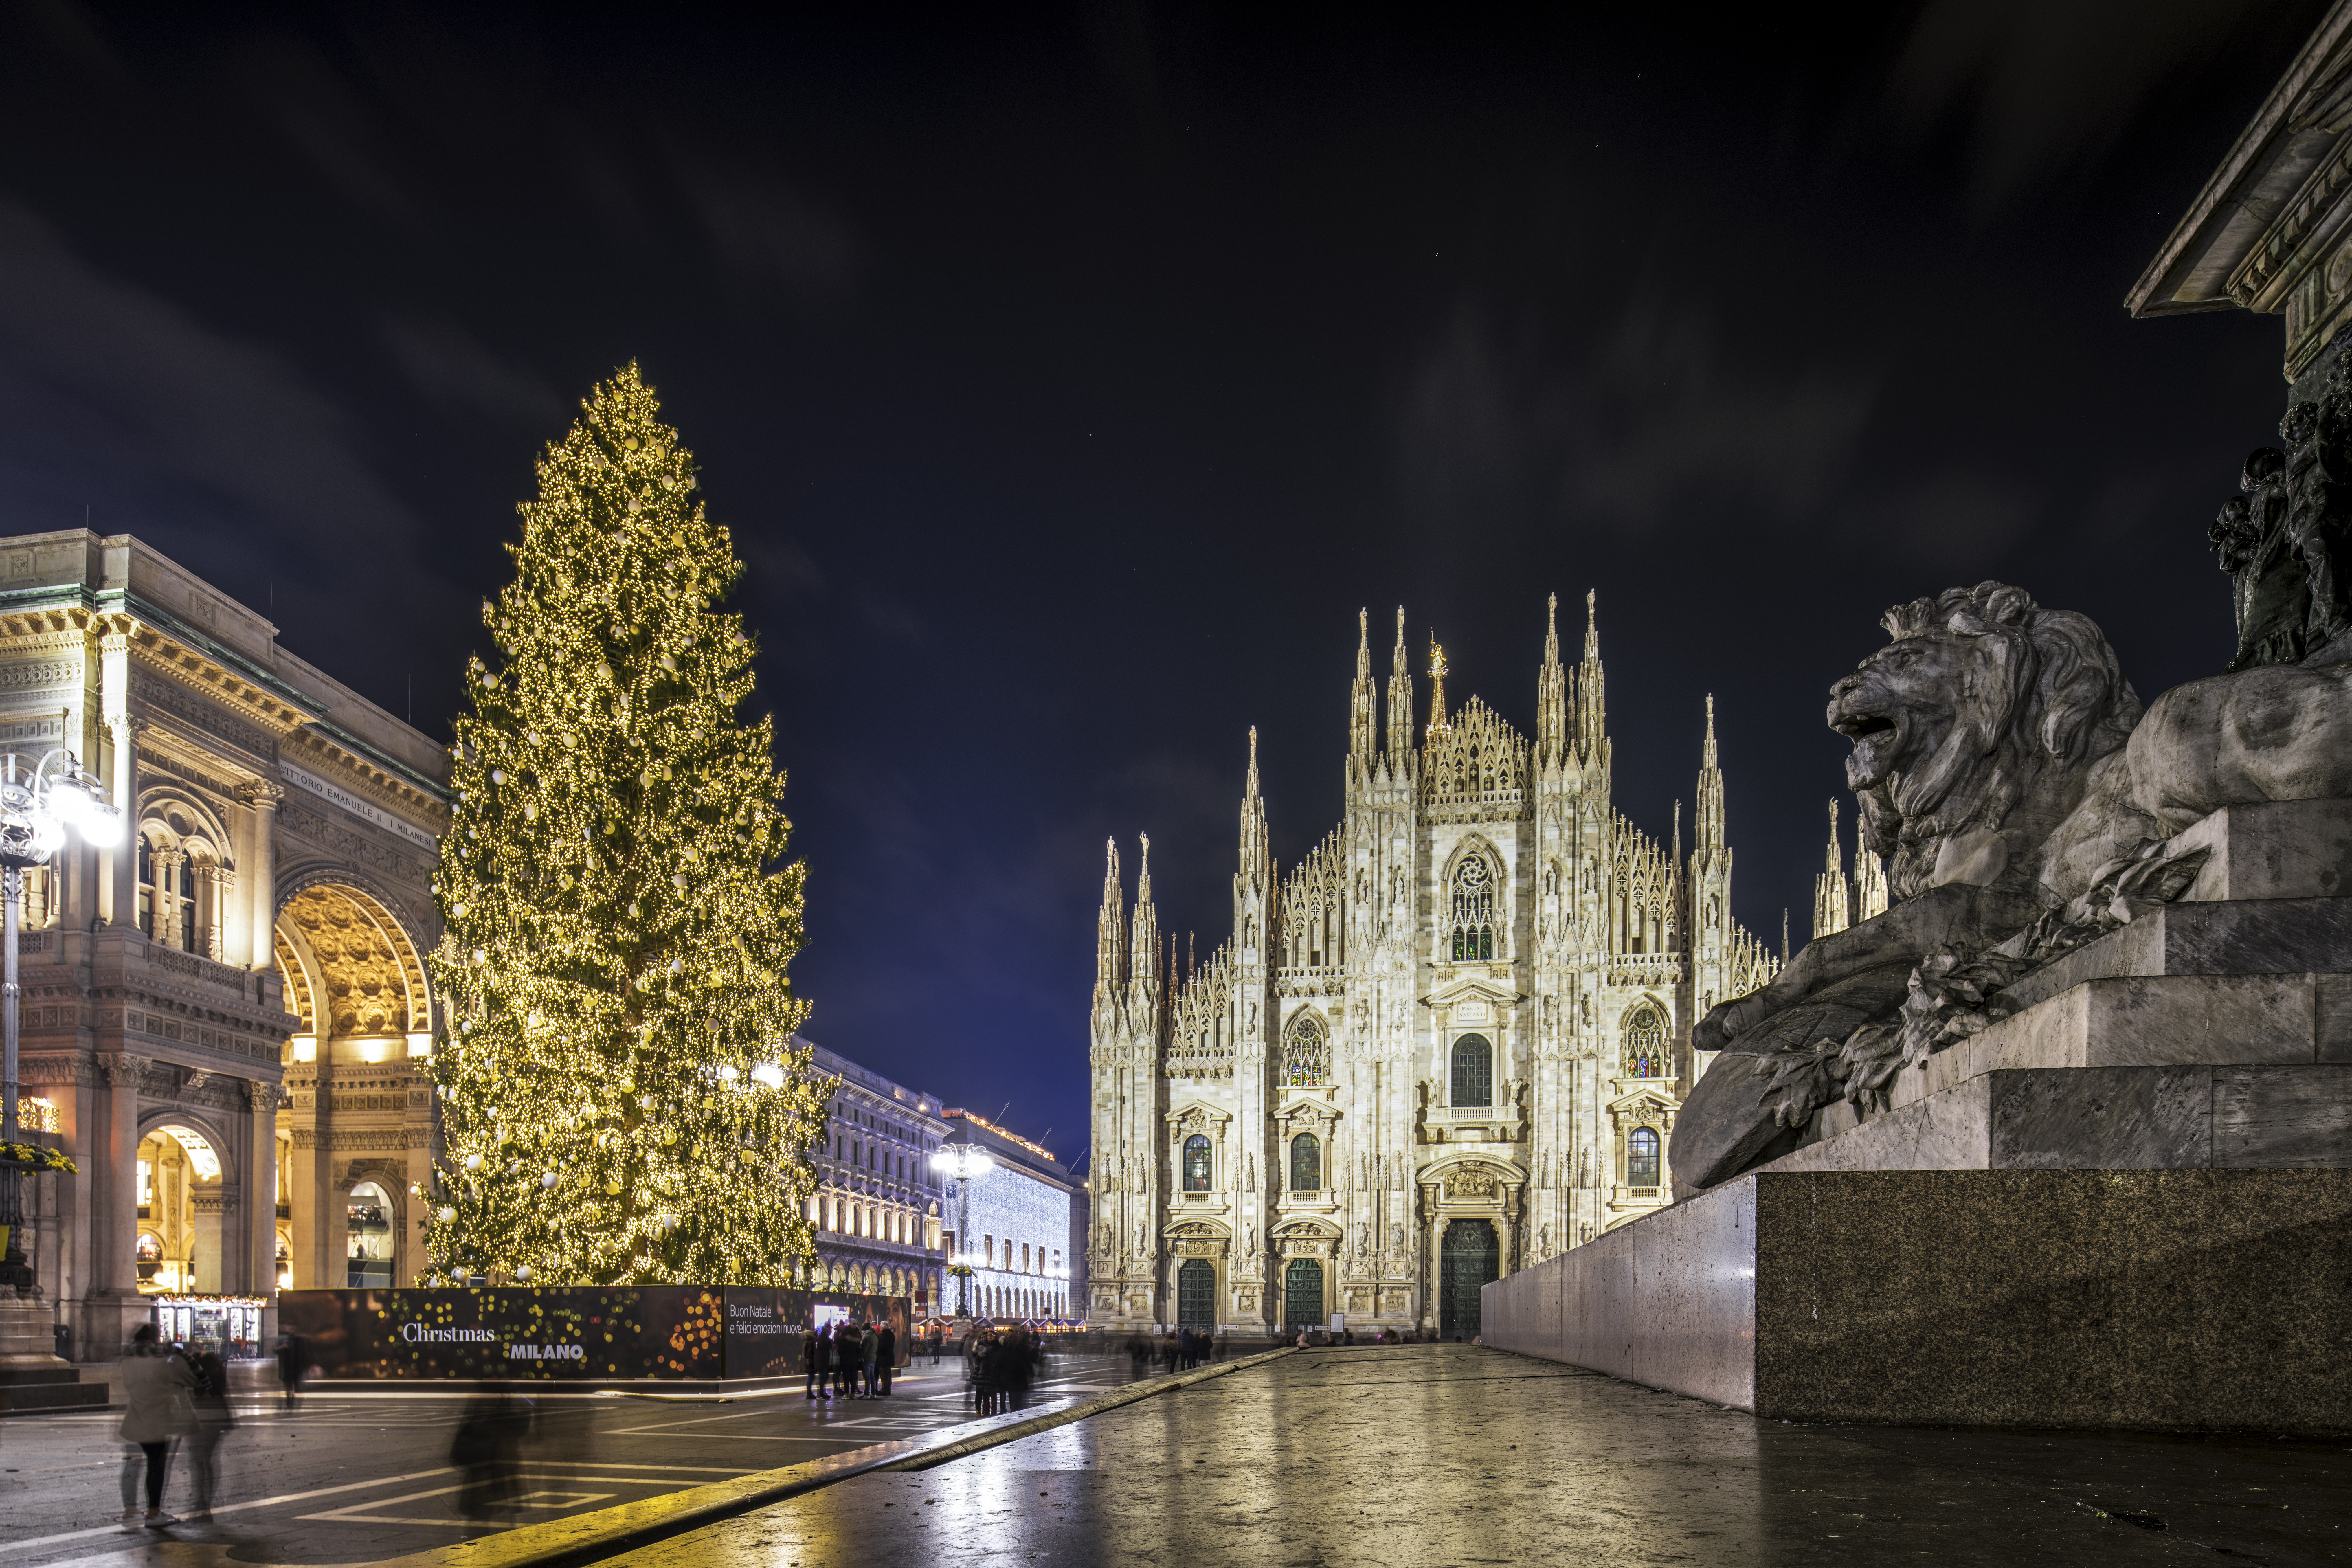 Duomo and Galleria with the tallest christmas tree in Milan by night